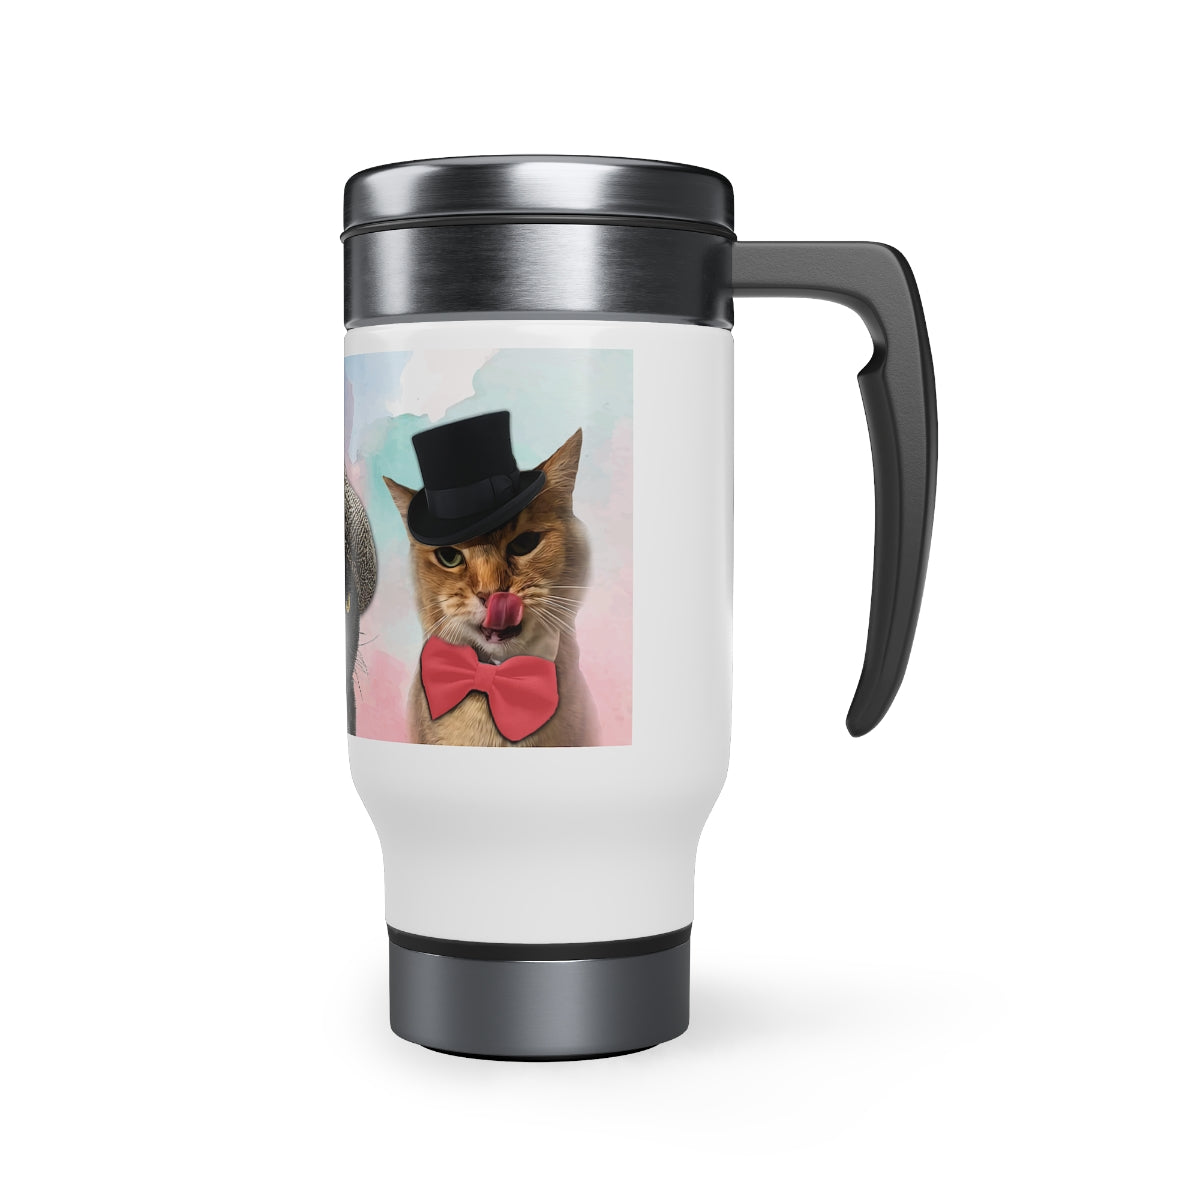 Cats In Hats Travel Mug with Handle, 14oz